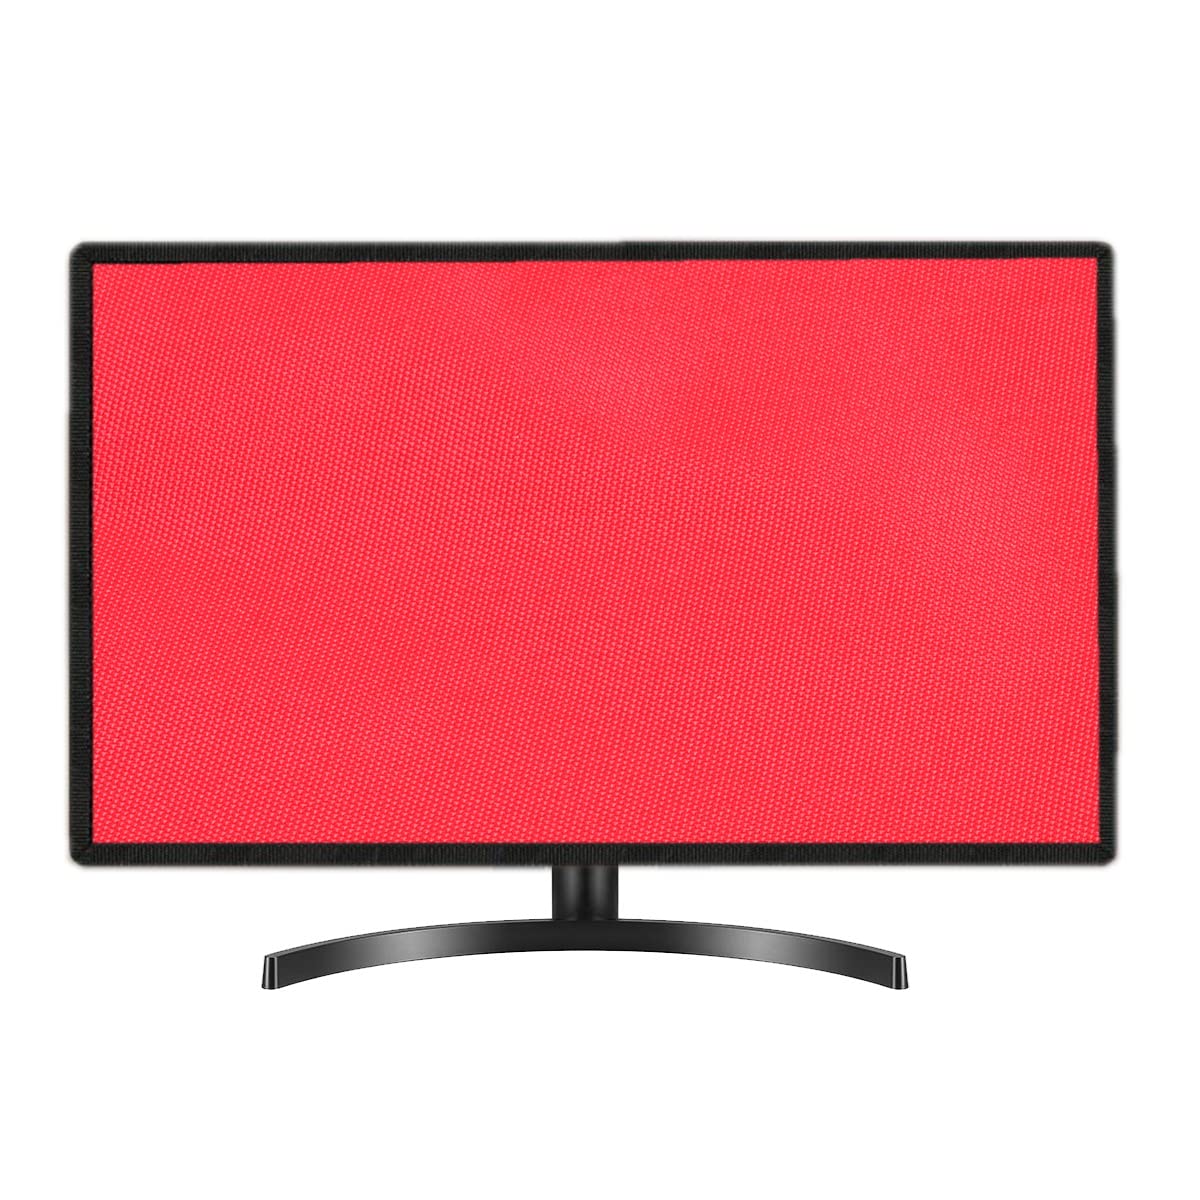 PalaP Super Premium Dust Proof Monitor Cover for ACER 18.5 inches Monitor (RED)